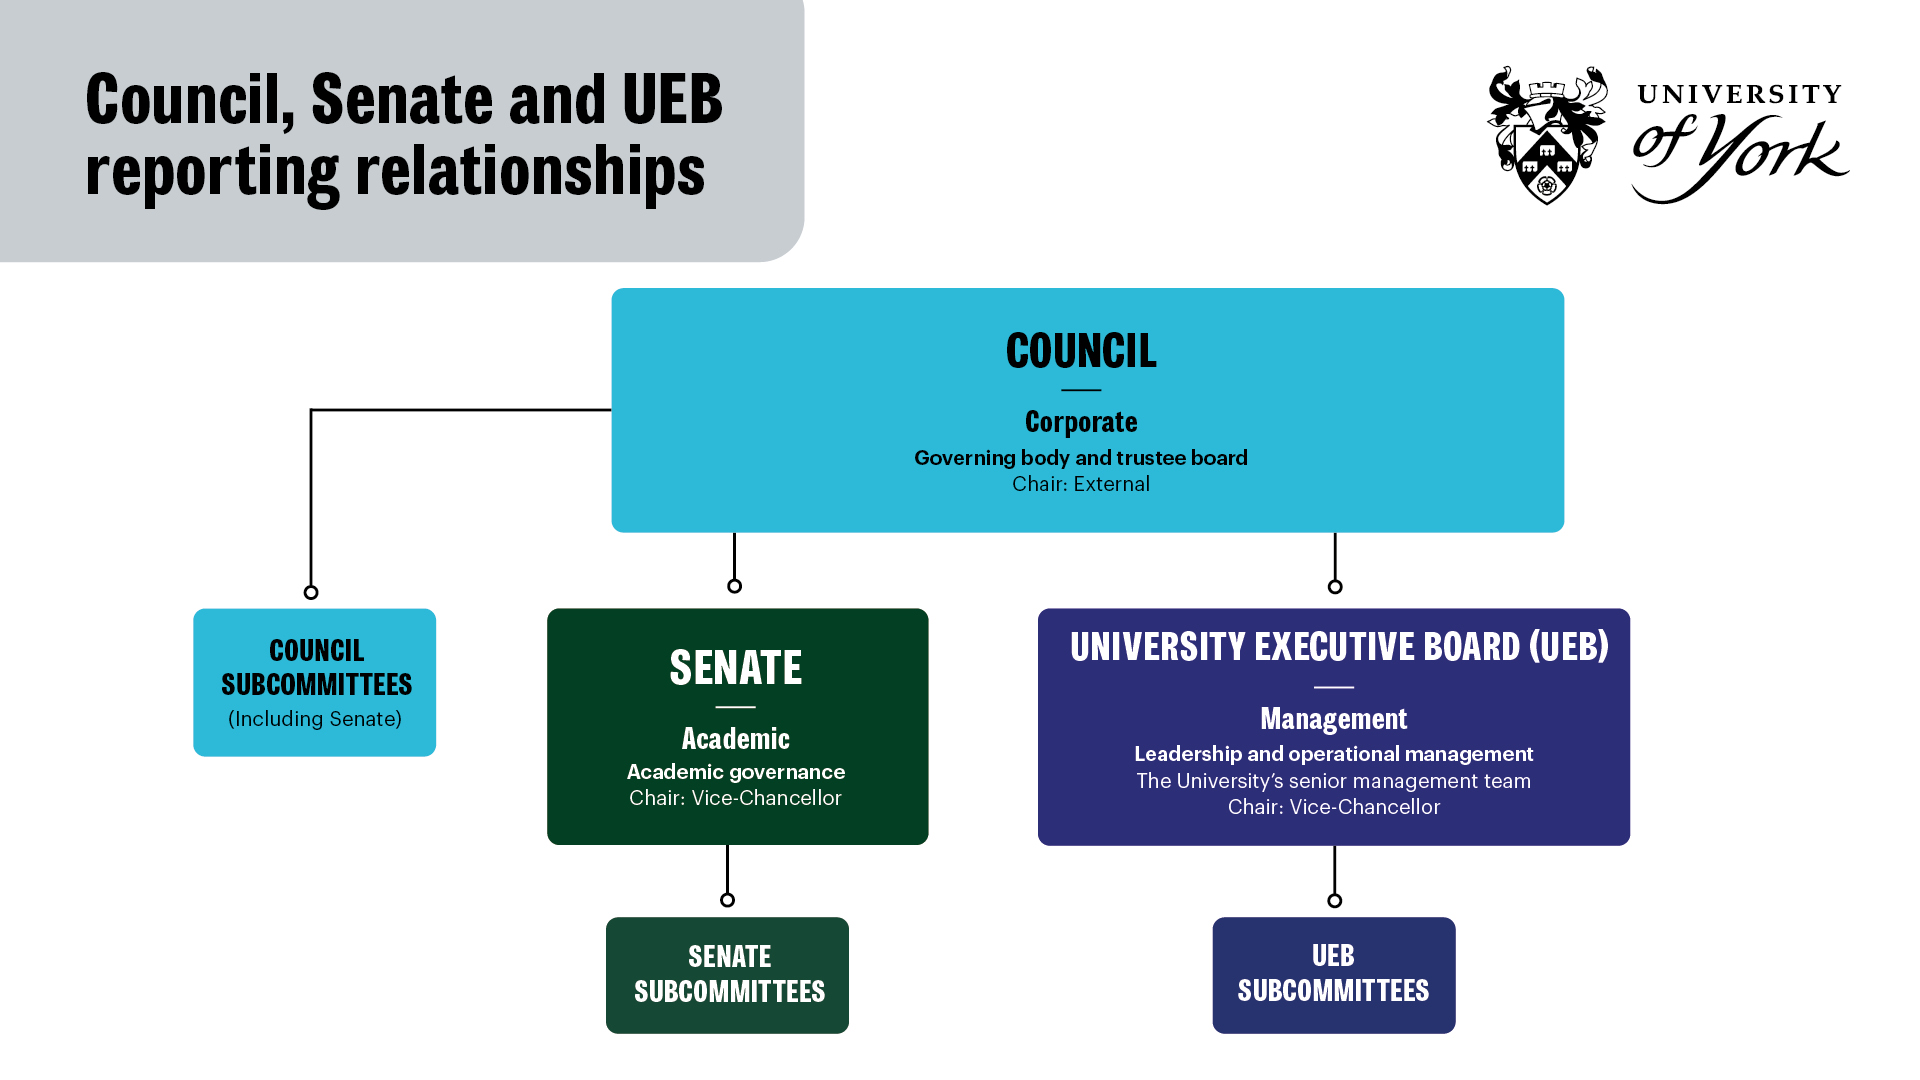 Council, Senate and UEB reporting relationships: Senate (academic governance) and University Executive Board (leadership and operational management) report to Council (governing body and trustee board). Council, Senate and UEB all have subcommittees.